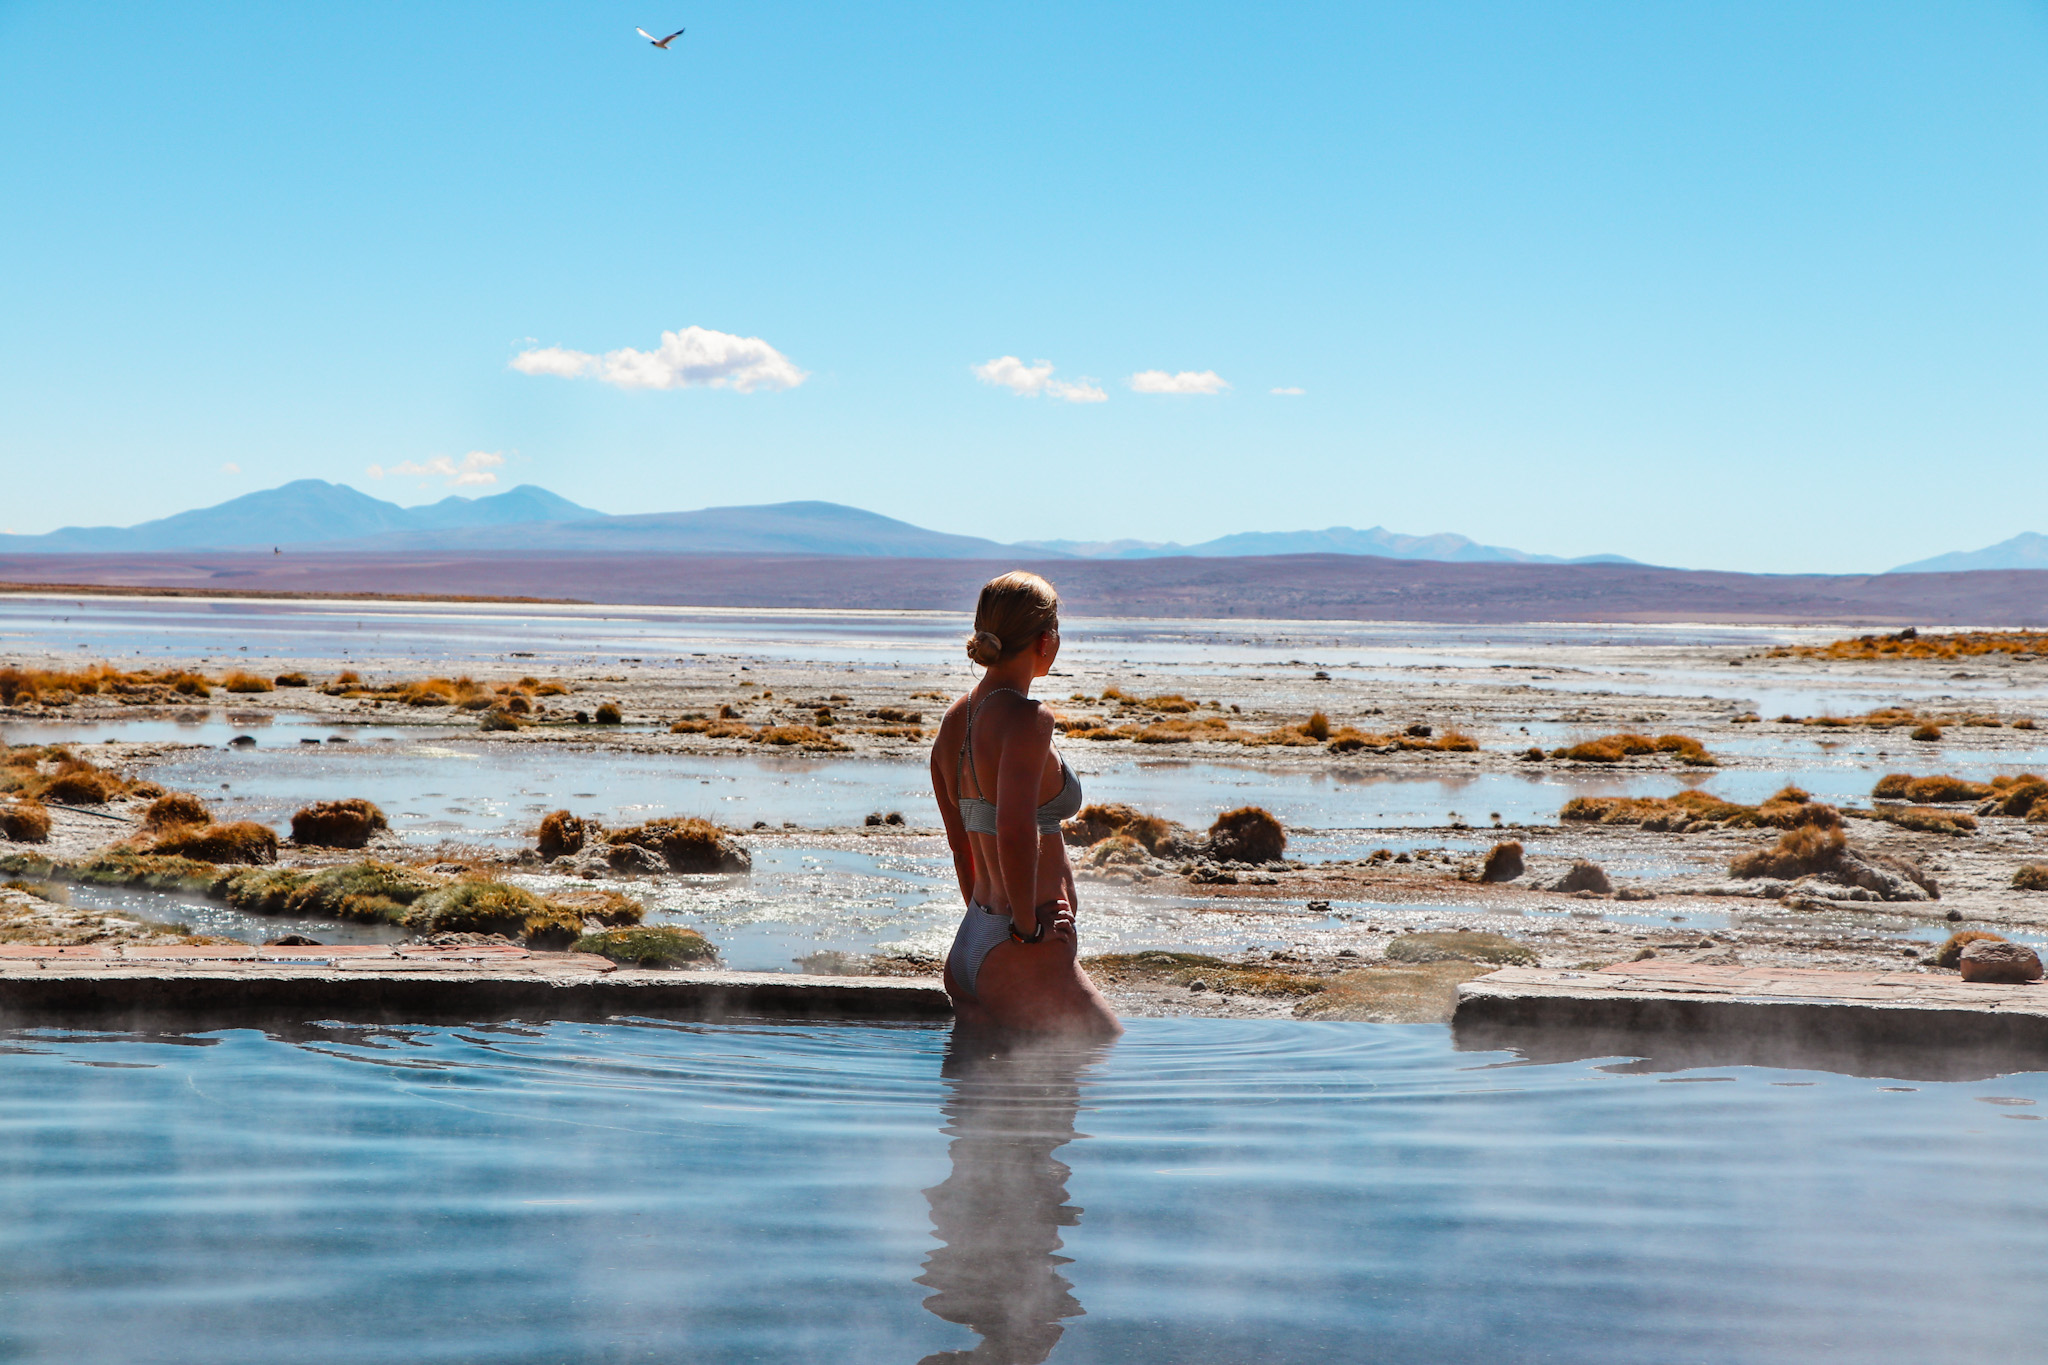 Uyuni Travel Guide: Relaxing in the hot springs Termales de Polques with amazing views over the stunning landscape